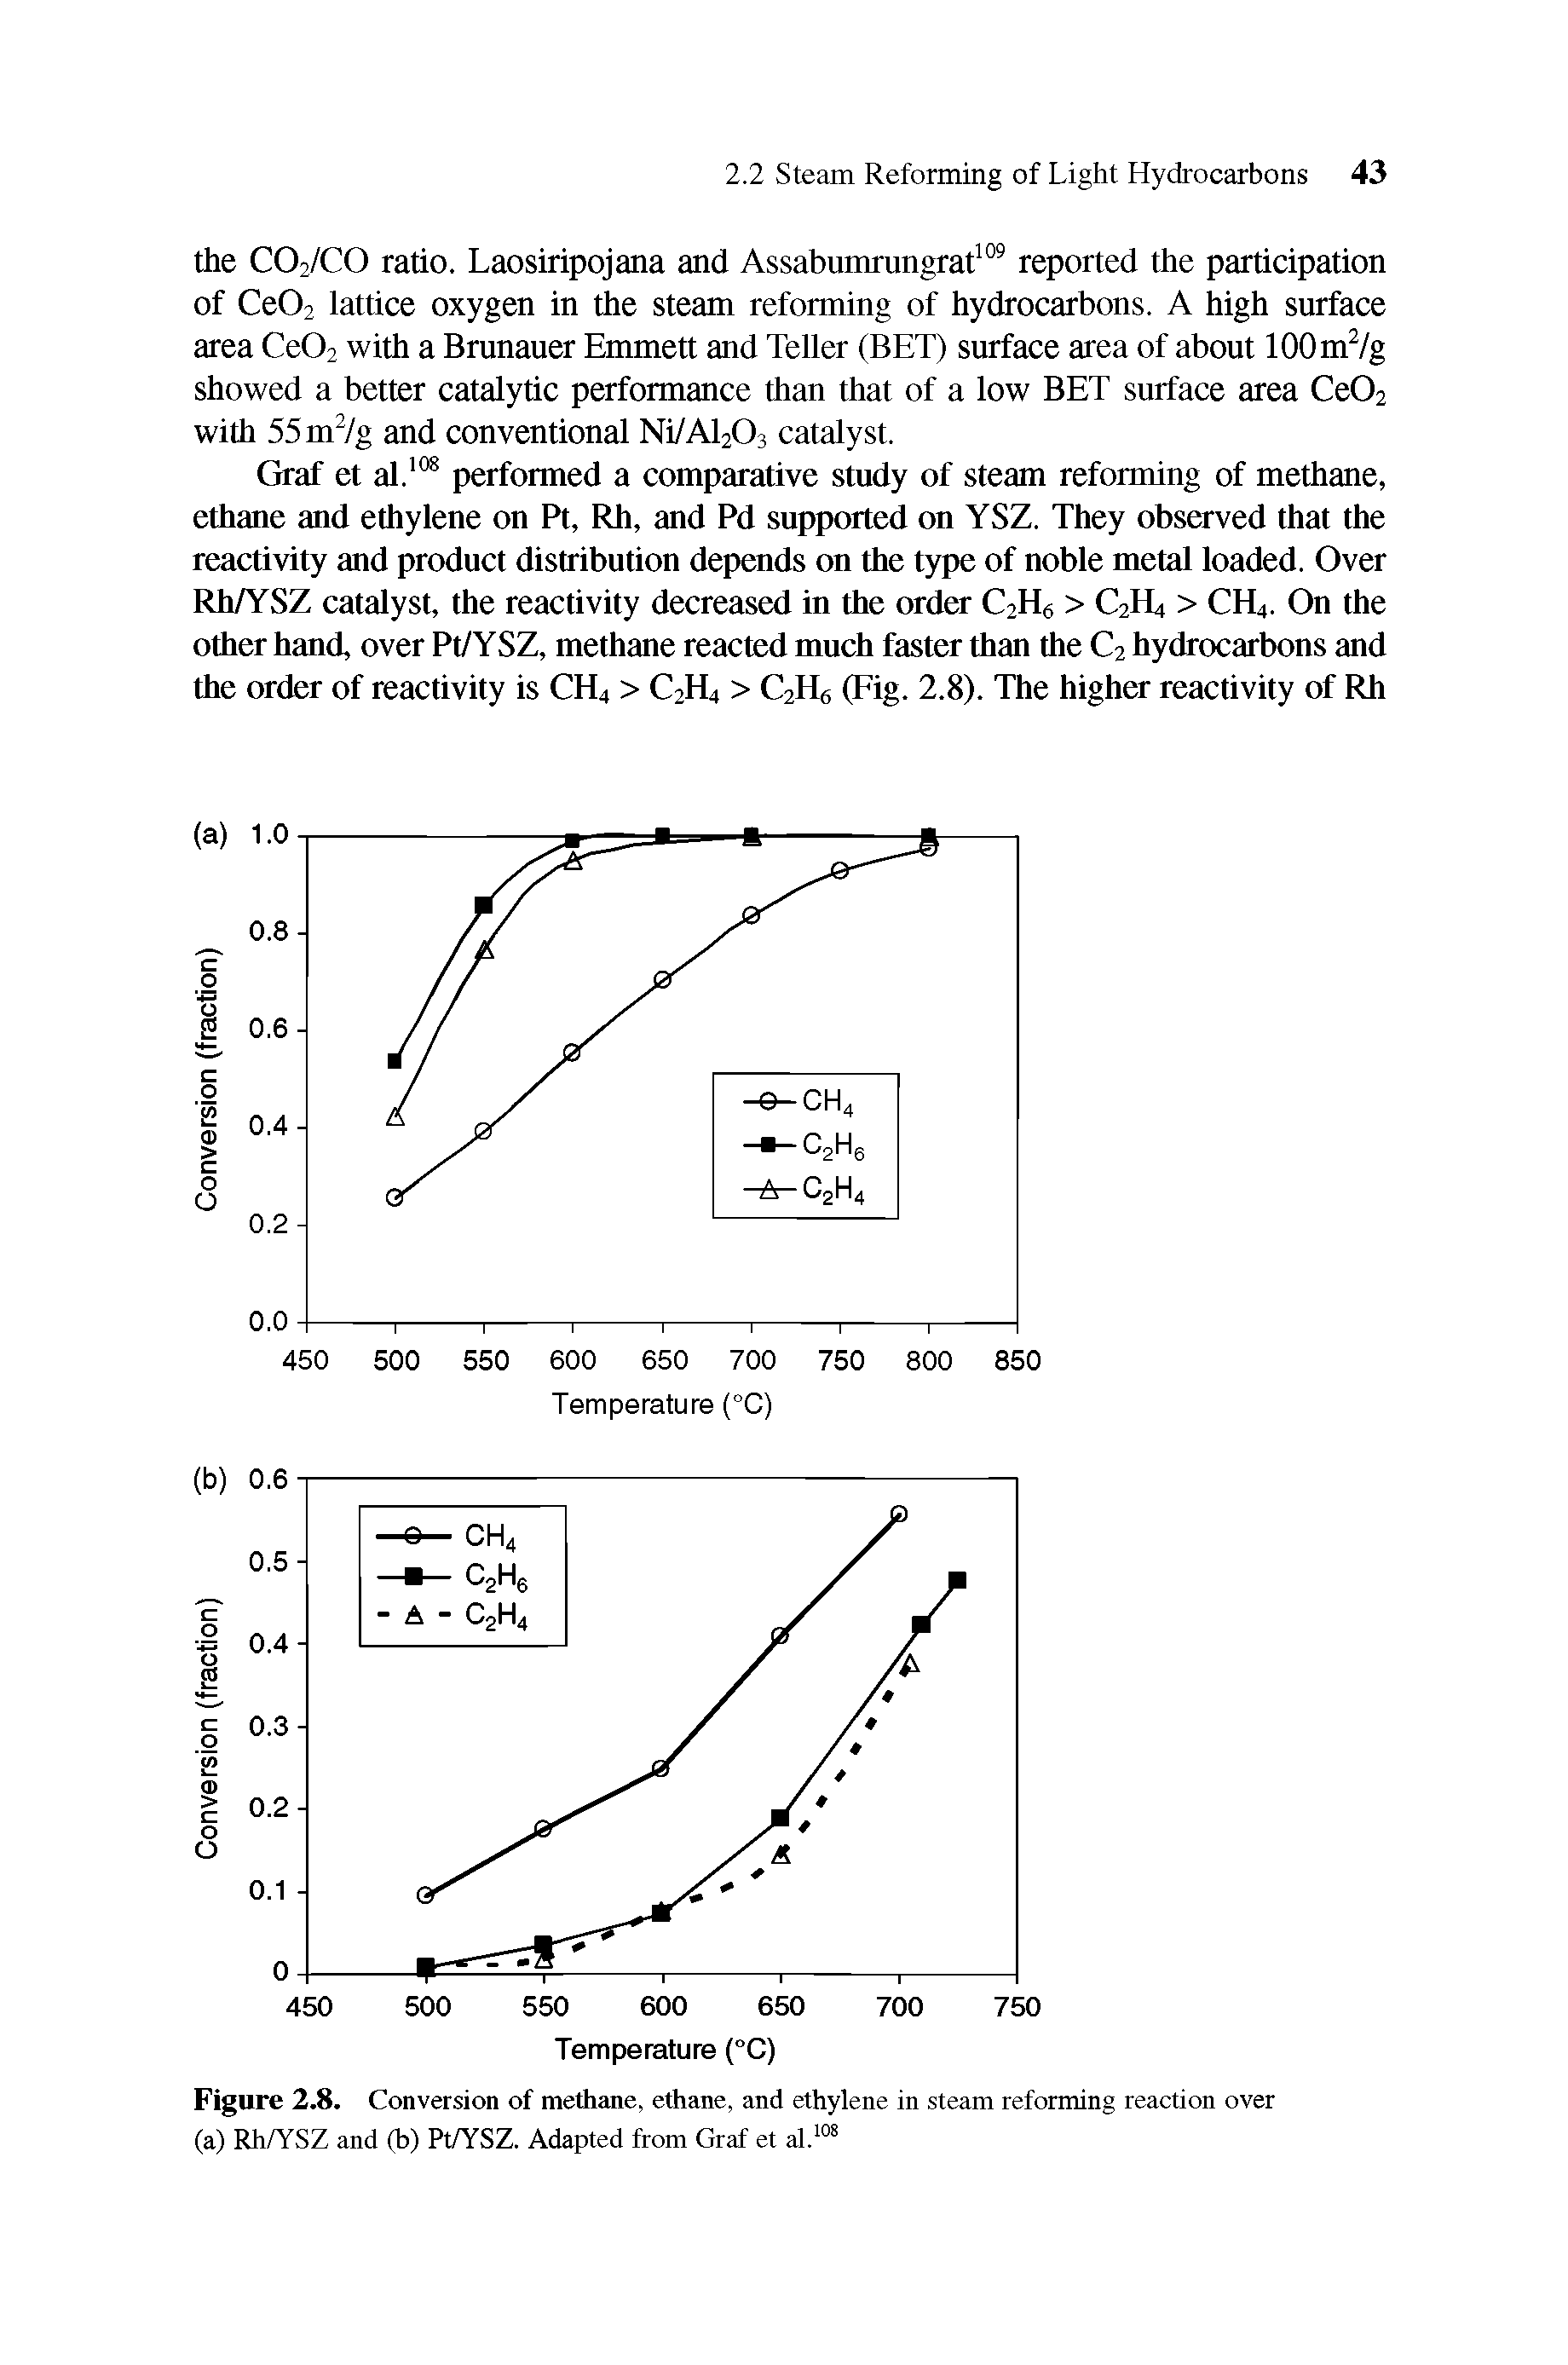 Figure 2.8. Conversion of methane, ethane, and ethylene in steam reforming reaction over (a) Rh/YSZ and (b) Pt/YSZ. Adapted from Graf et al.108...